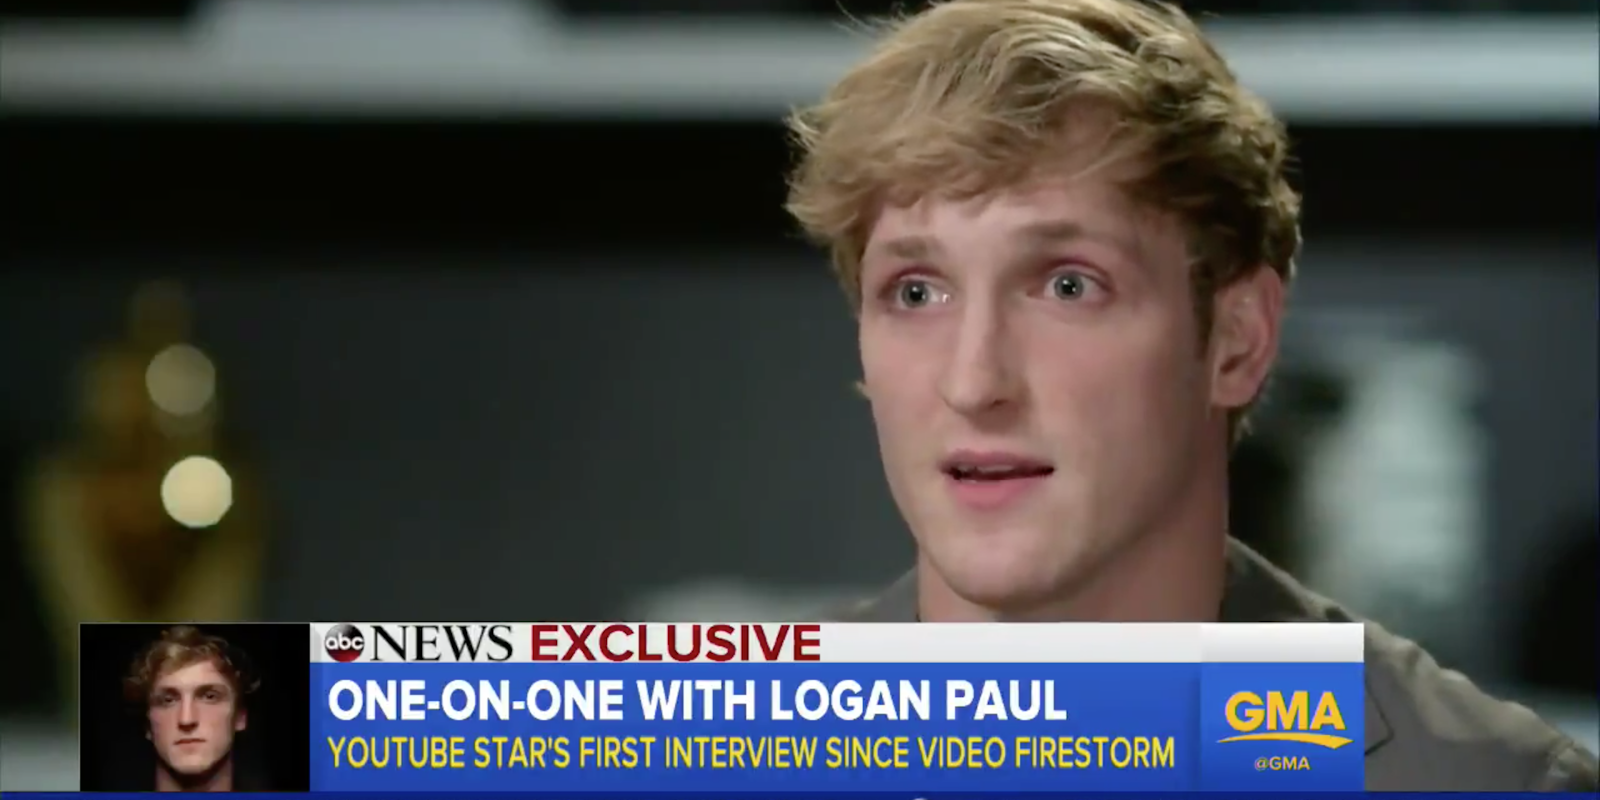 Logan Paul makes a serious face on Good Morning America